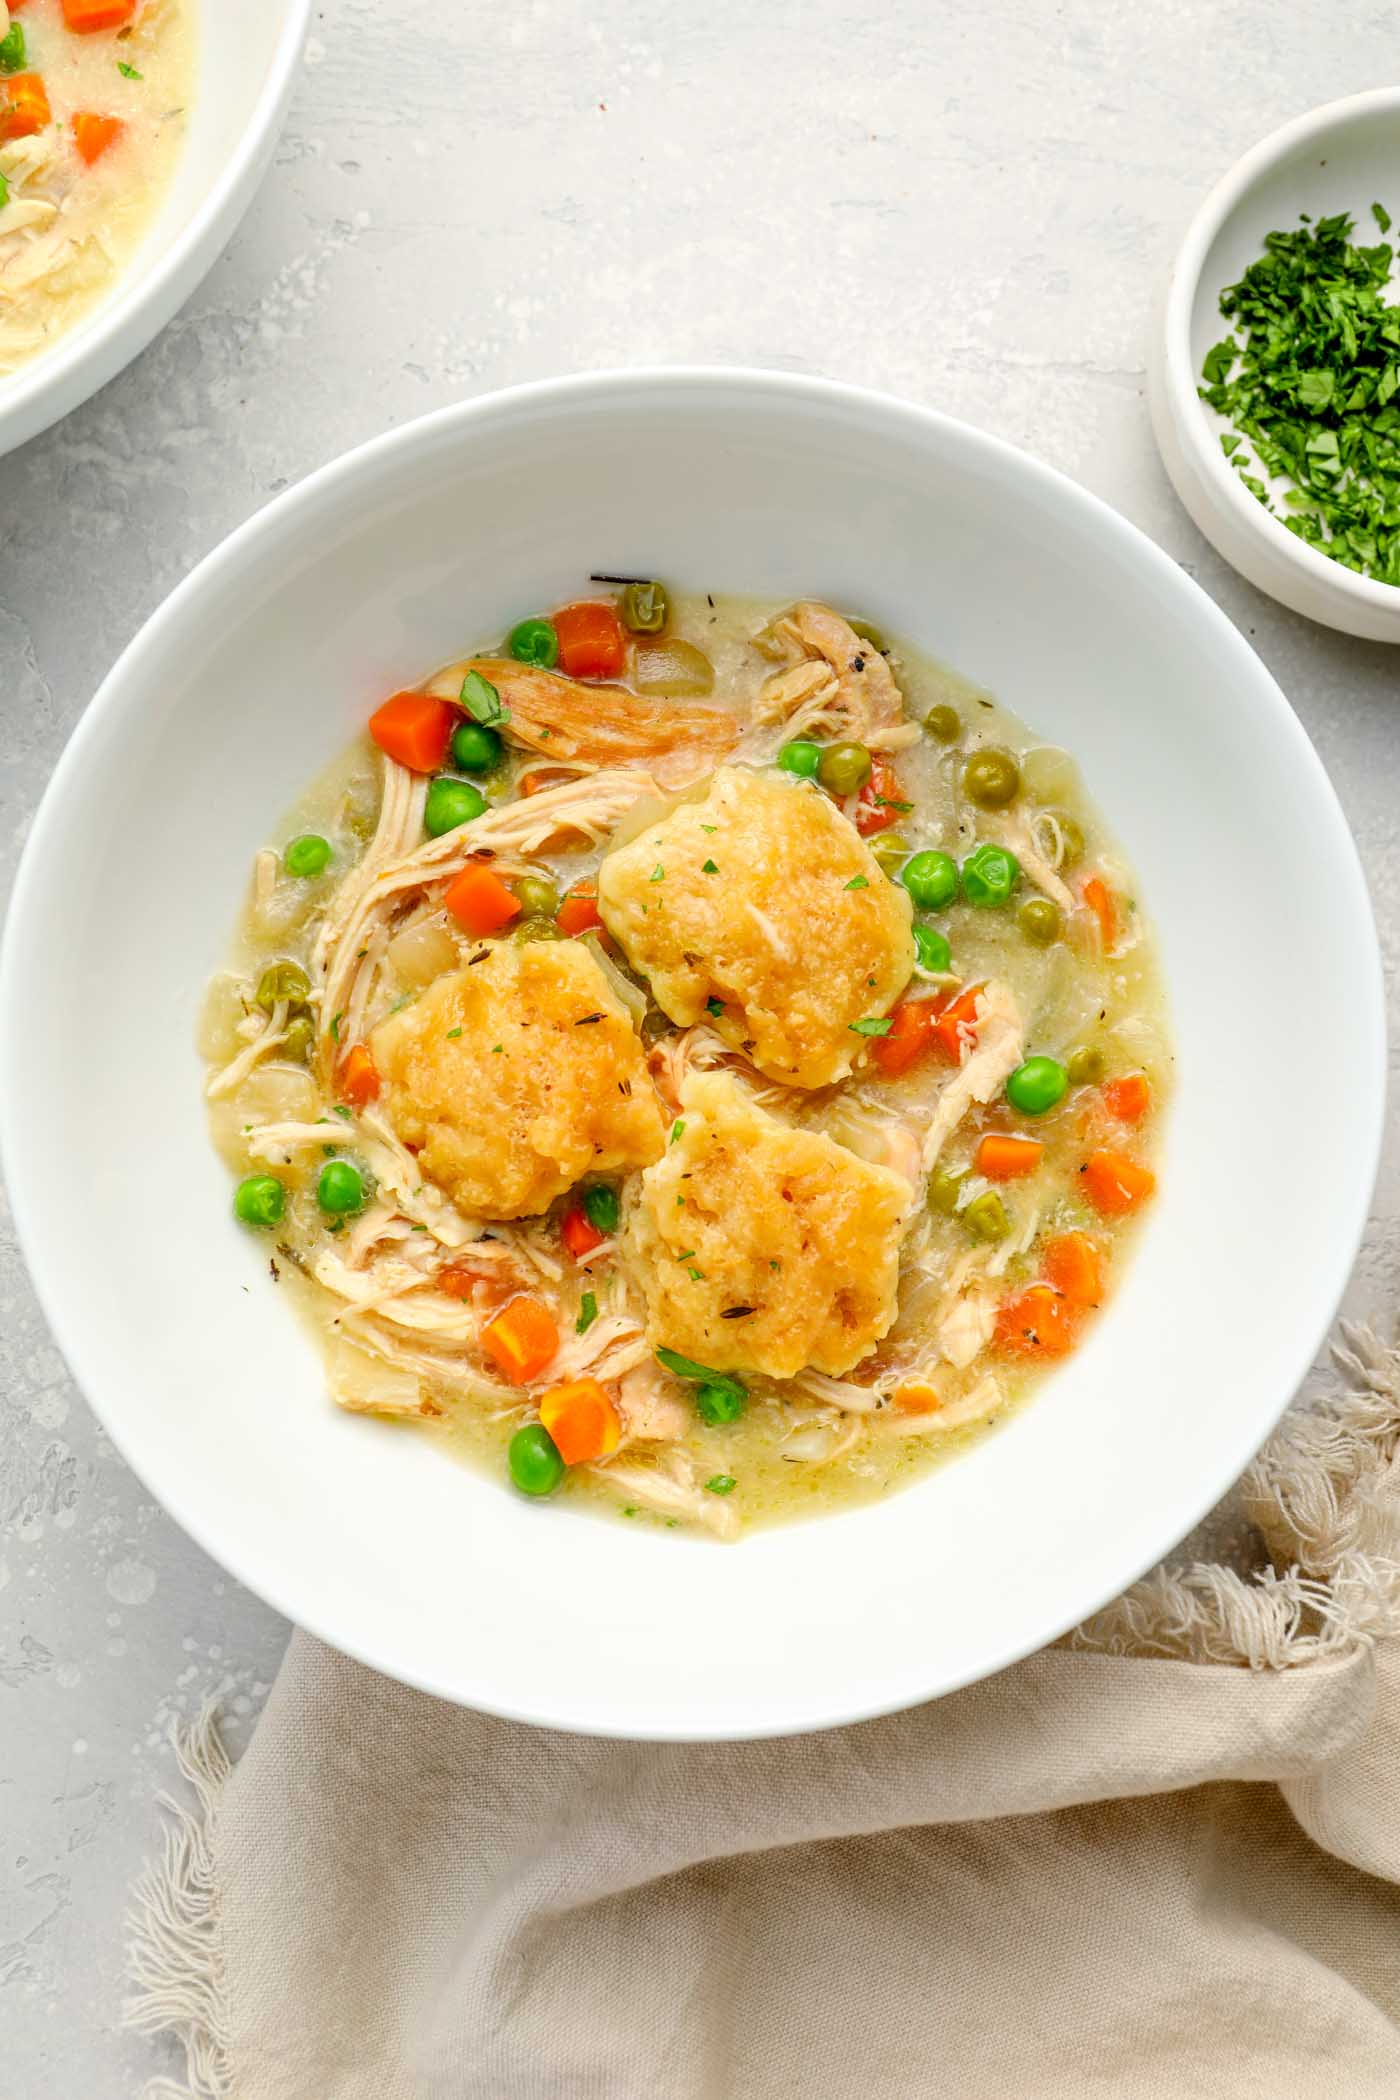 A serving of crock pot chicken and dumplings in a white bowl.